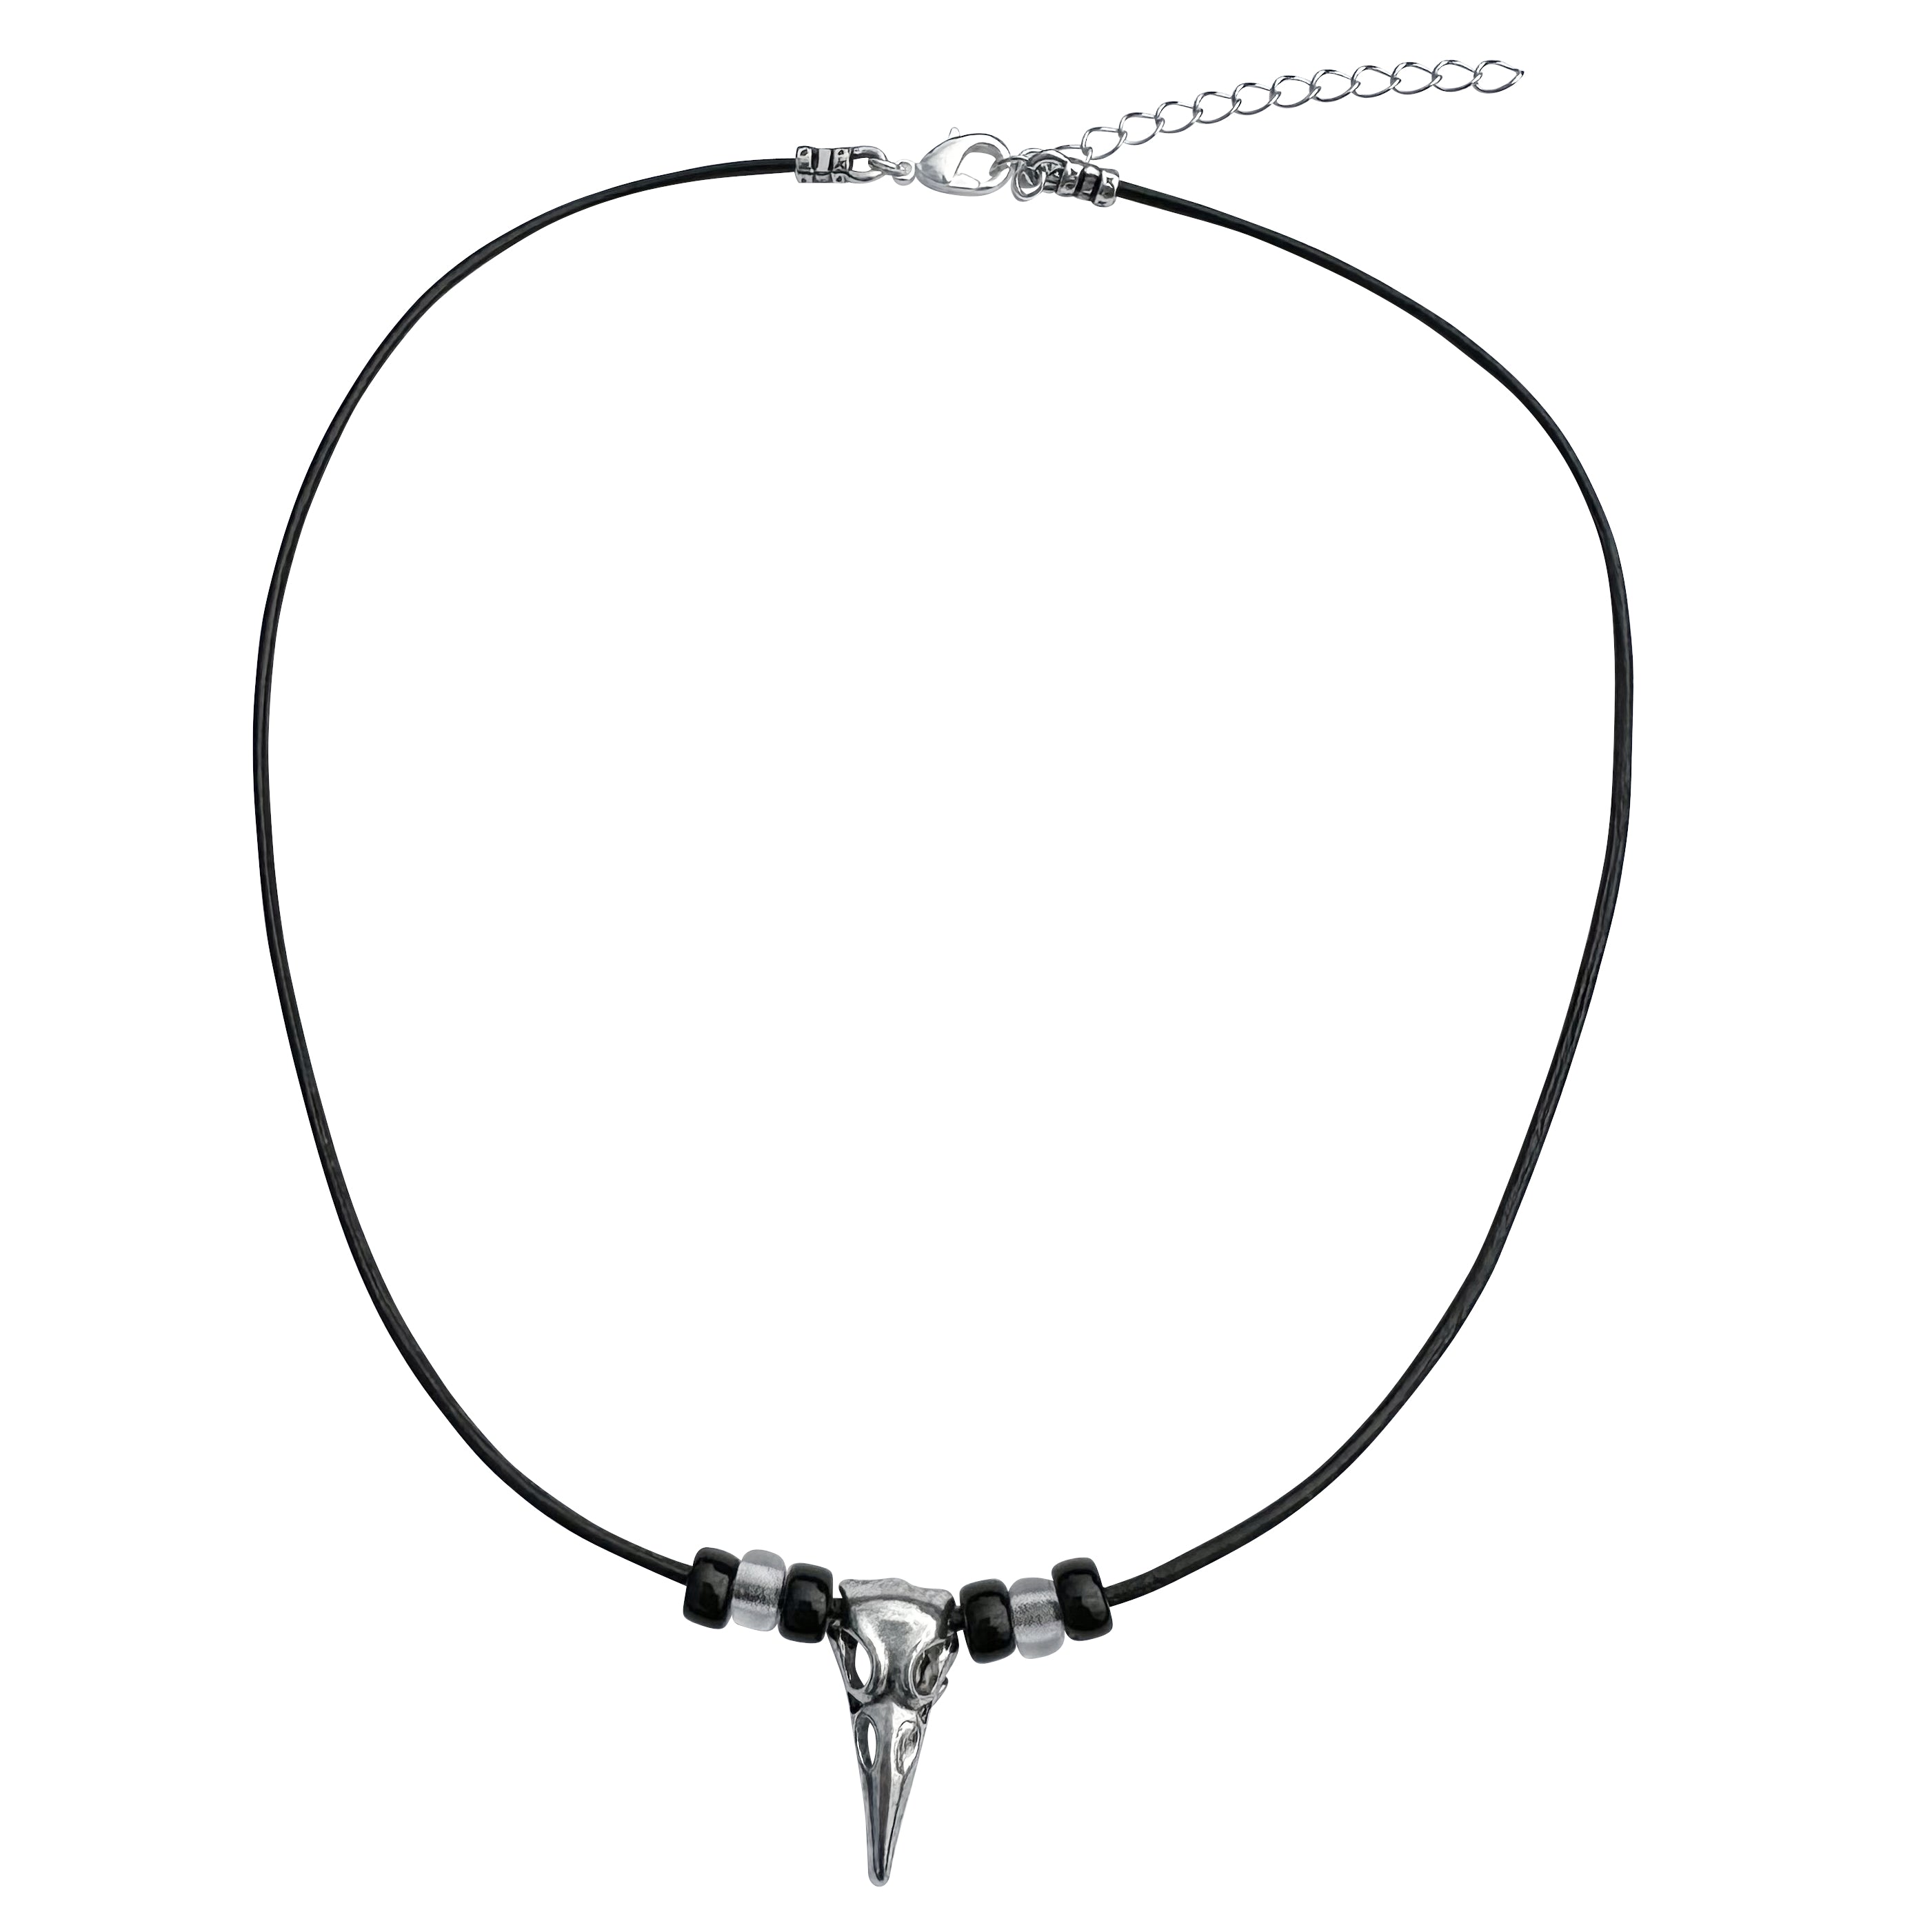 Silver Raven Skull on Beaded Fine Black Leather Necklace Cord - 16" to